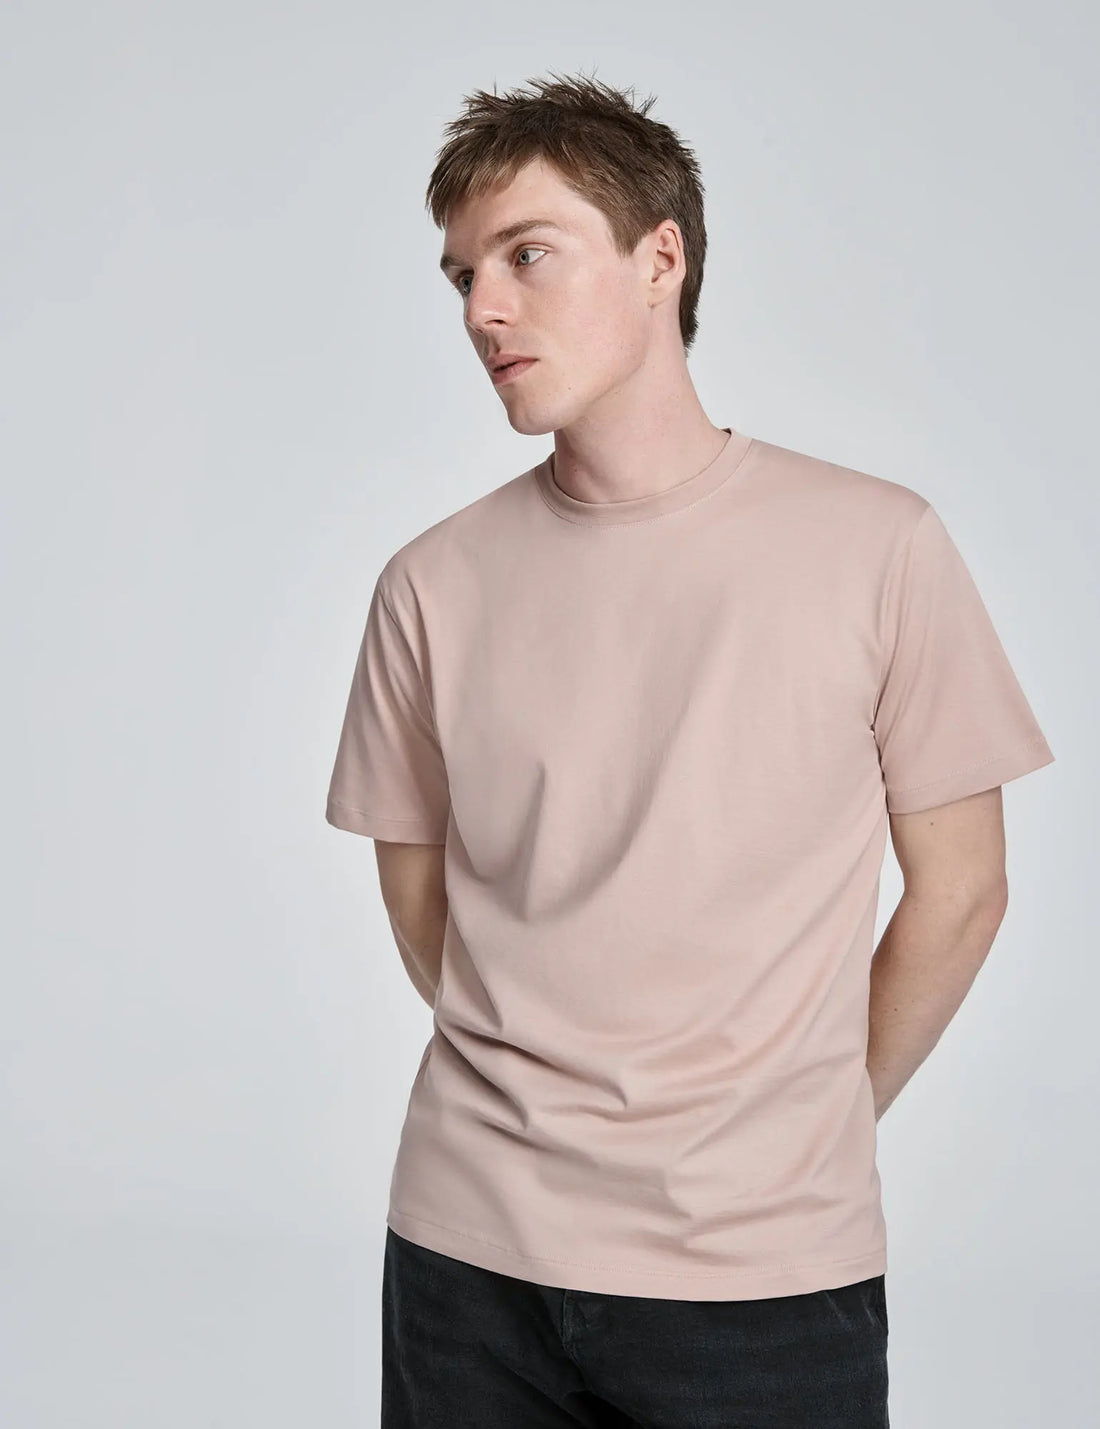 Crew Neck T Shirt- Dusty Rose - Eames NW